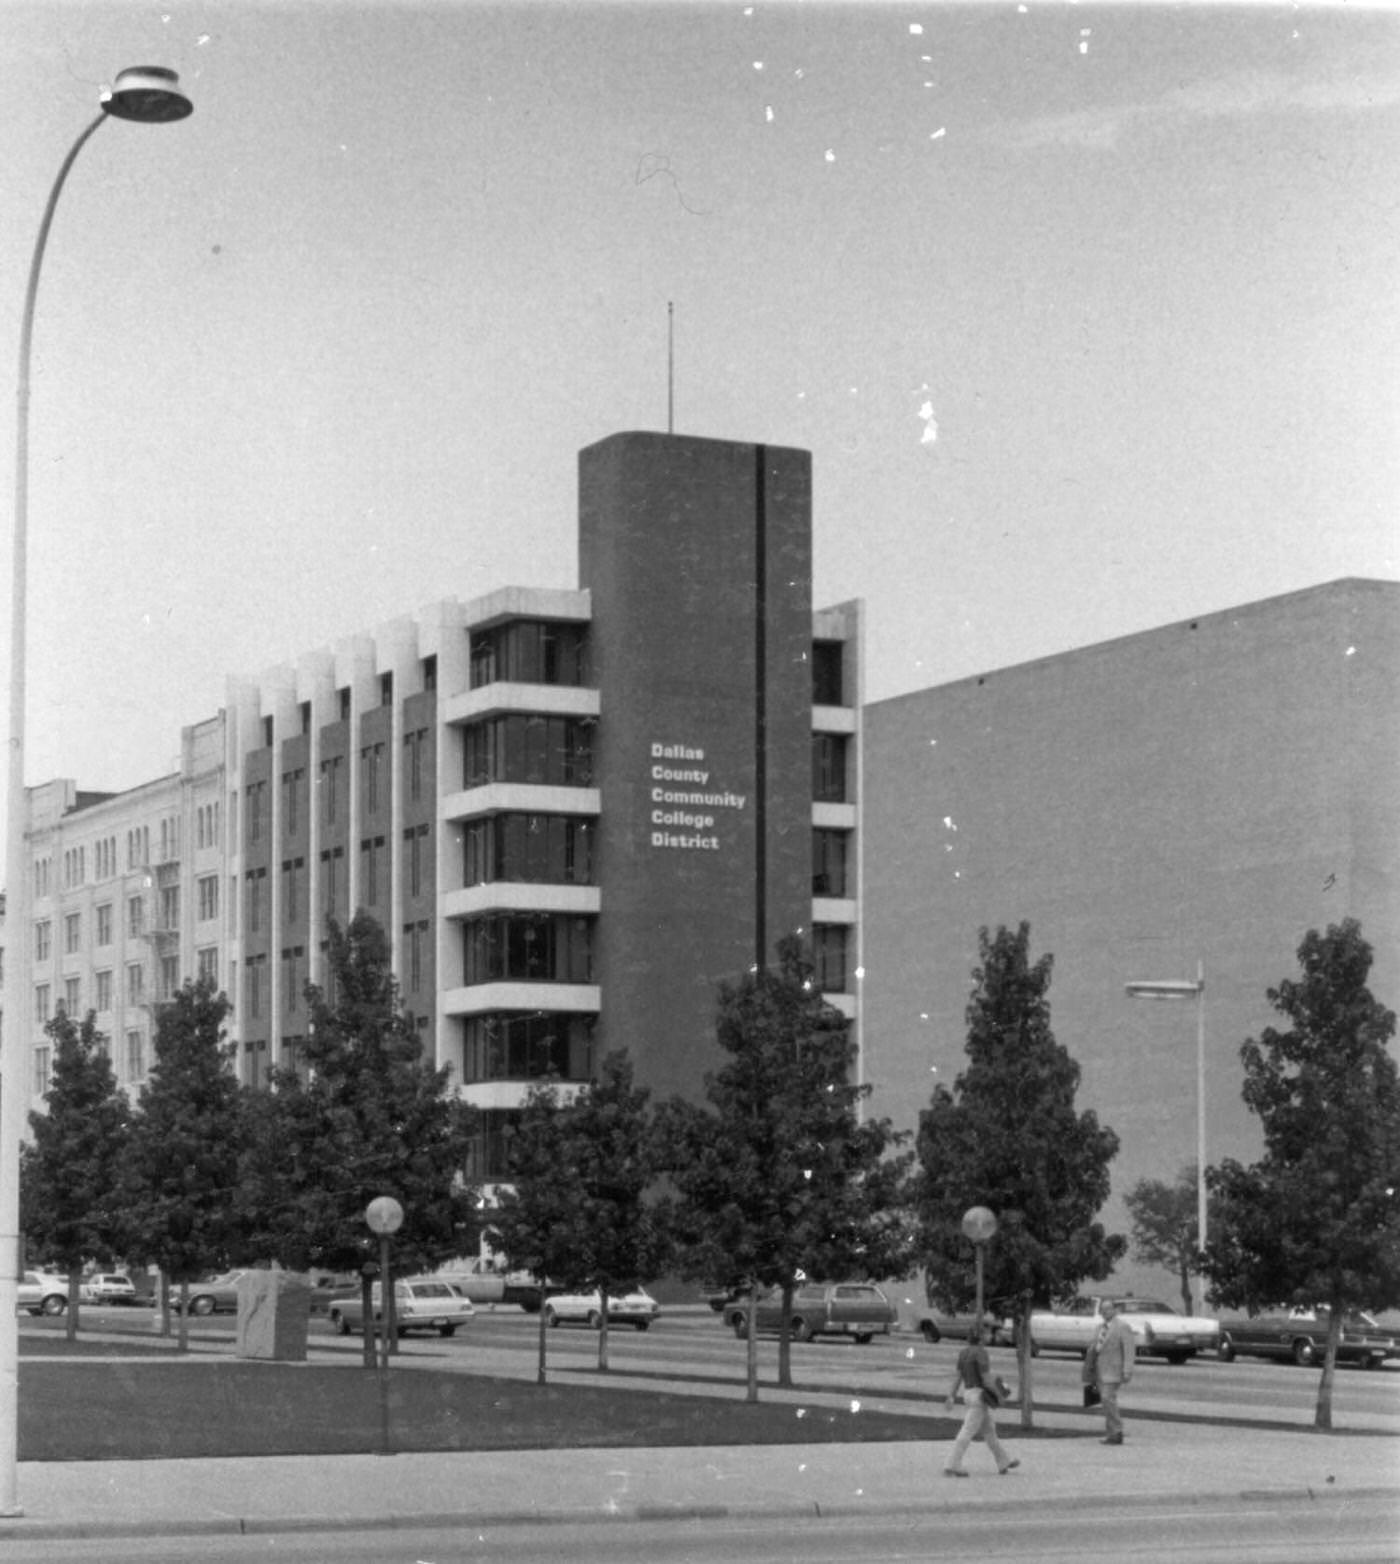 Office building at 701 Elm Street in Dallas, Texas taken from street, 1960s. The building is marked Dallas County Community College District. This building was also known as the R.L. Thornton building.